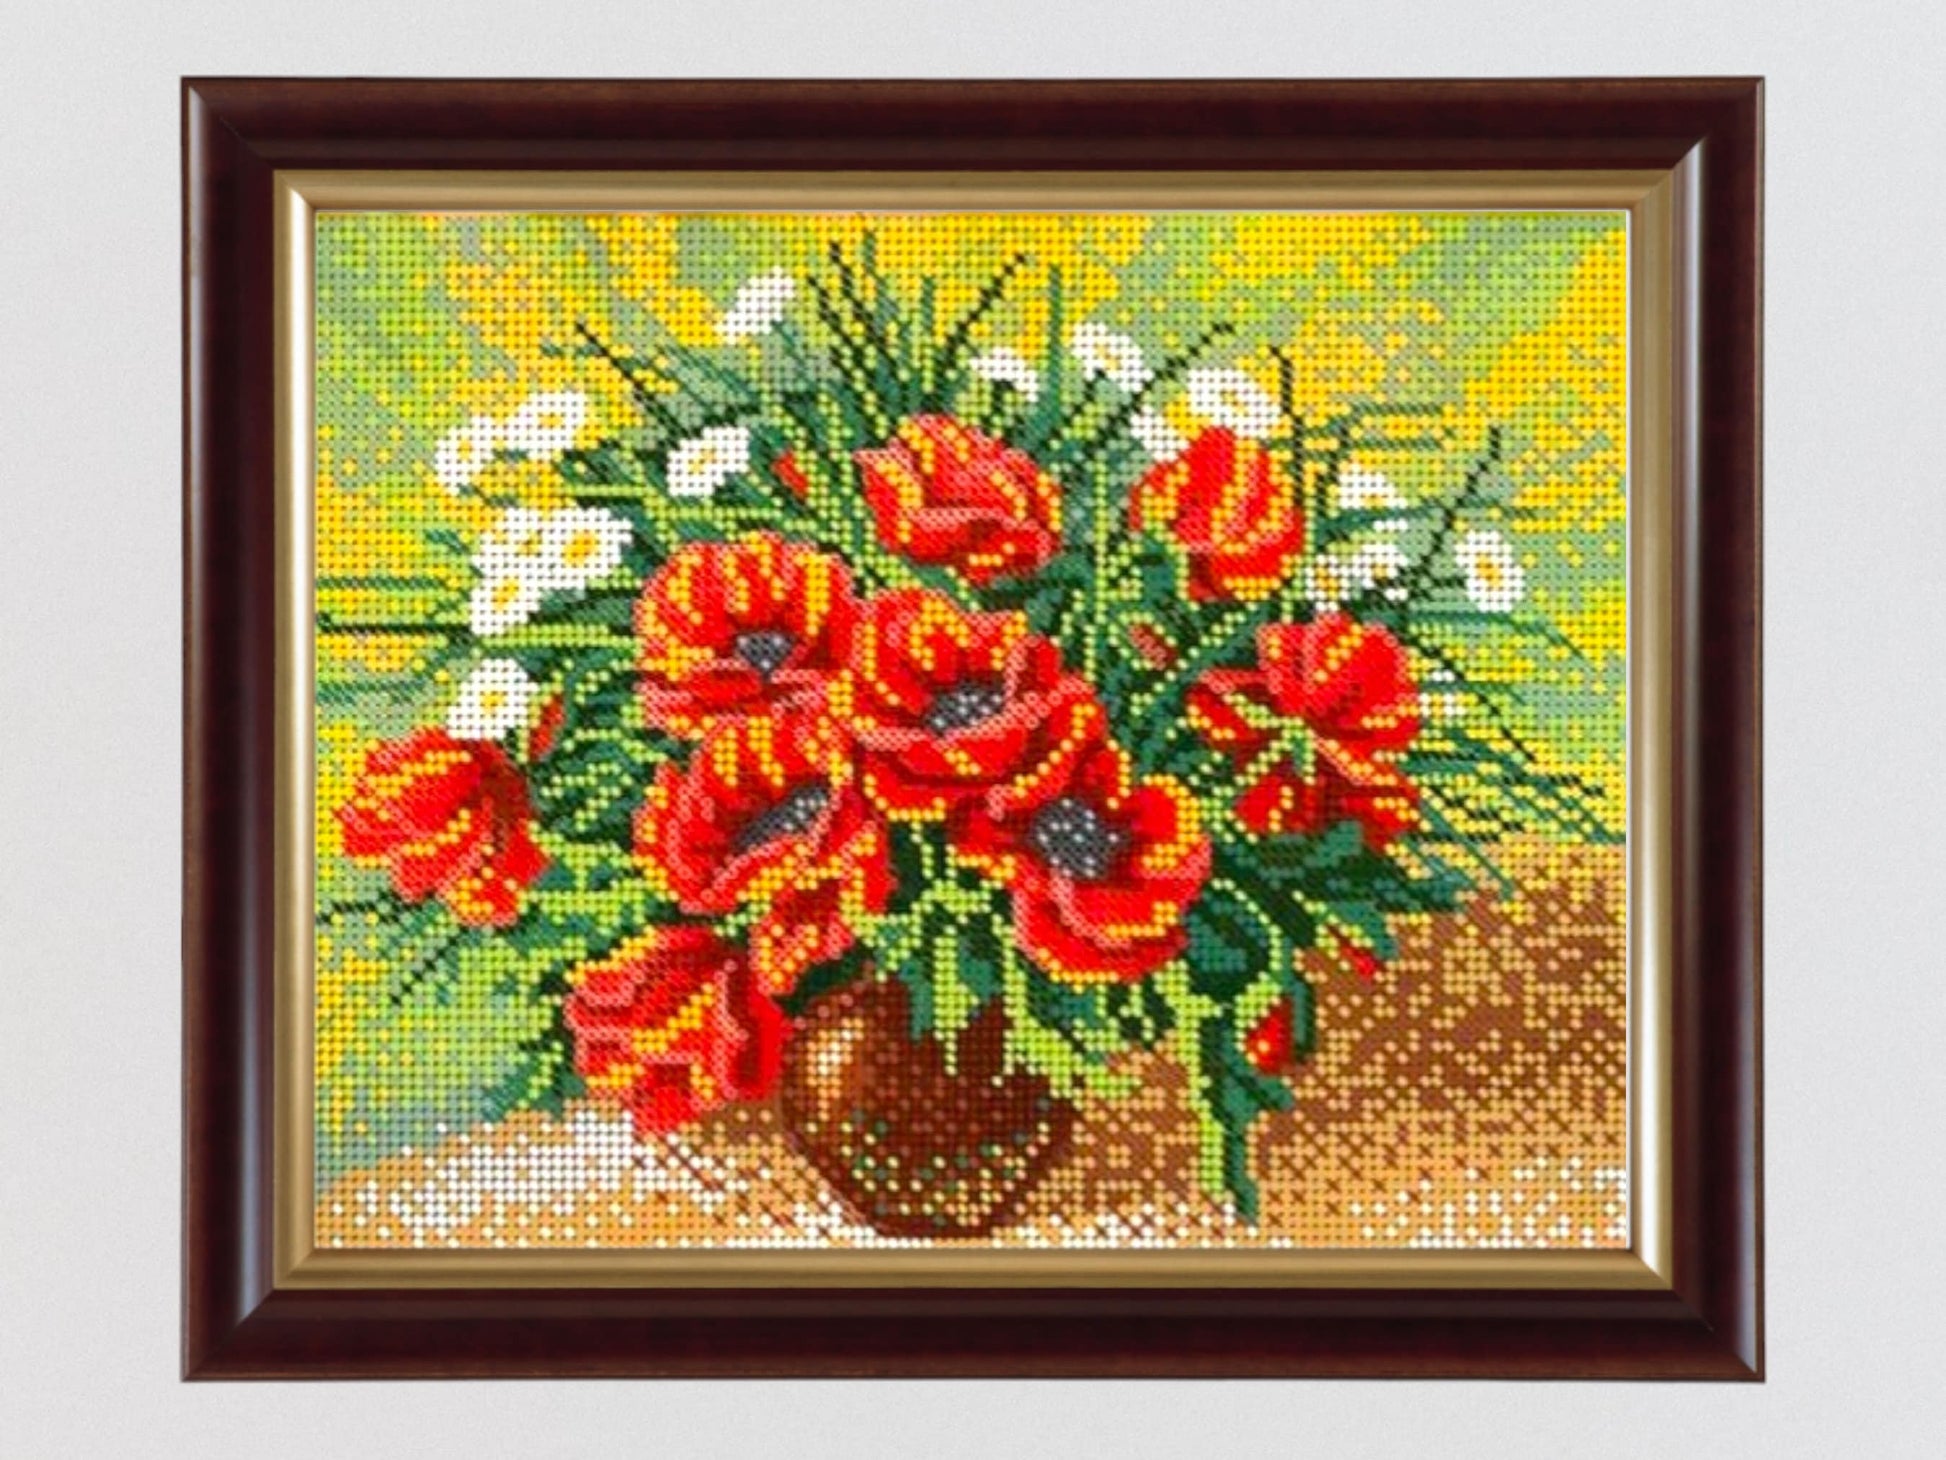 DIY Bead Embroidery Kit: Handcrafted Flowers, Poppies, and Chamomile Design Size: 10.2-7.9 in (26.5-20.2cm) - VadymShop